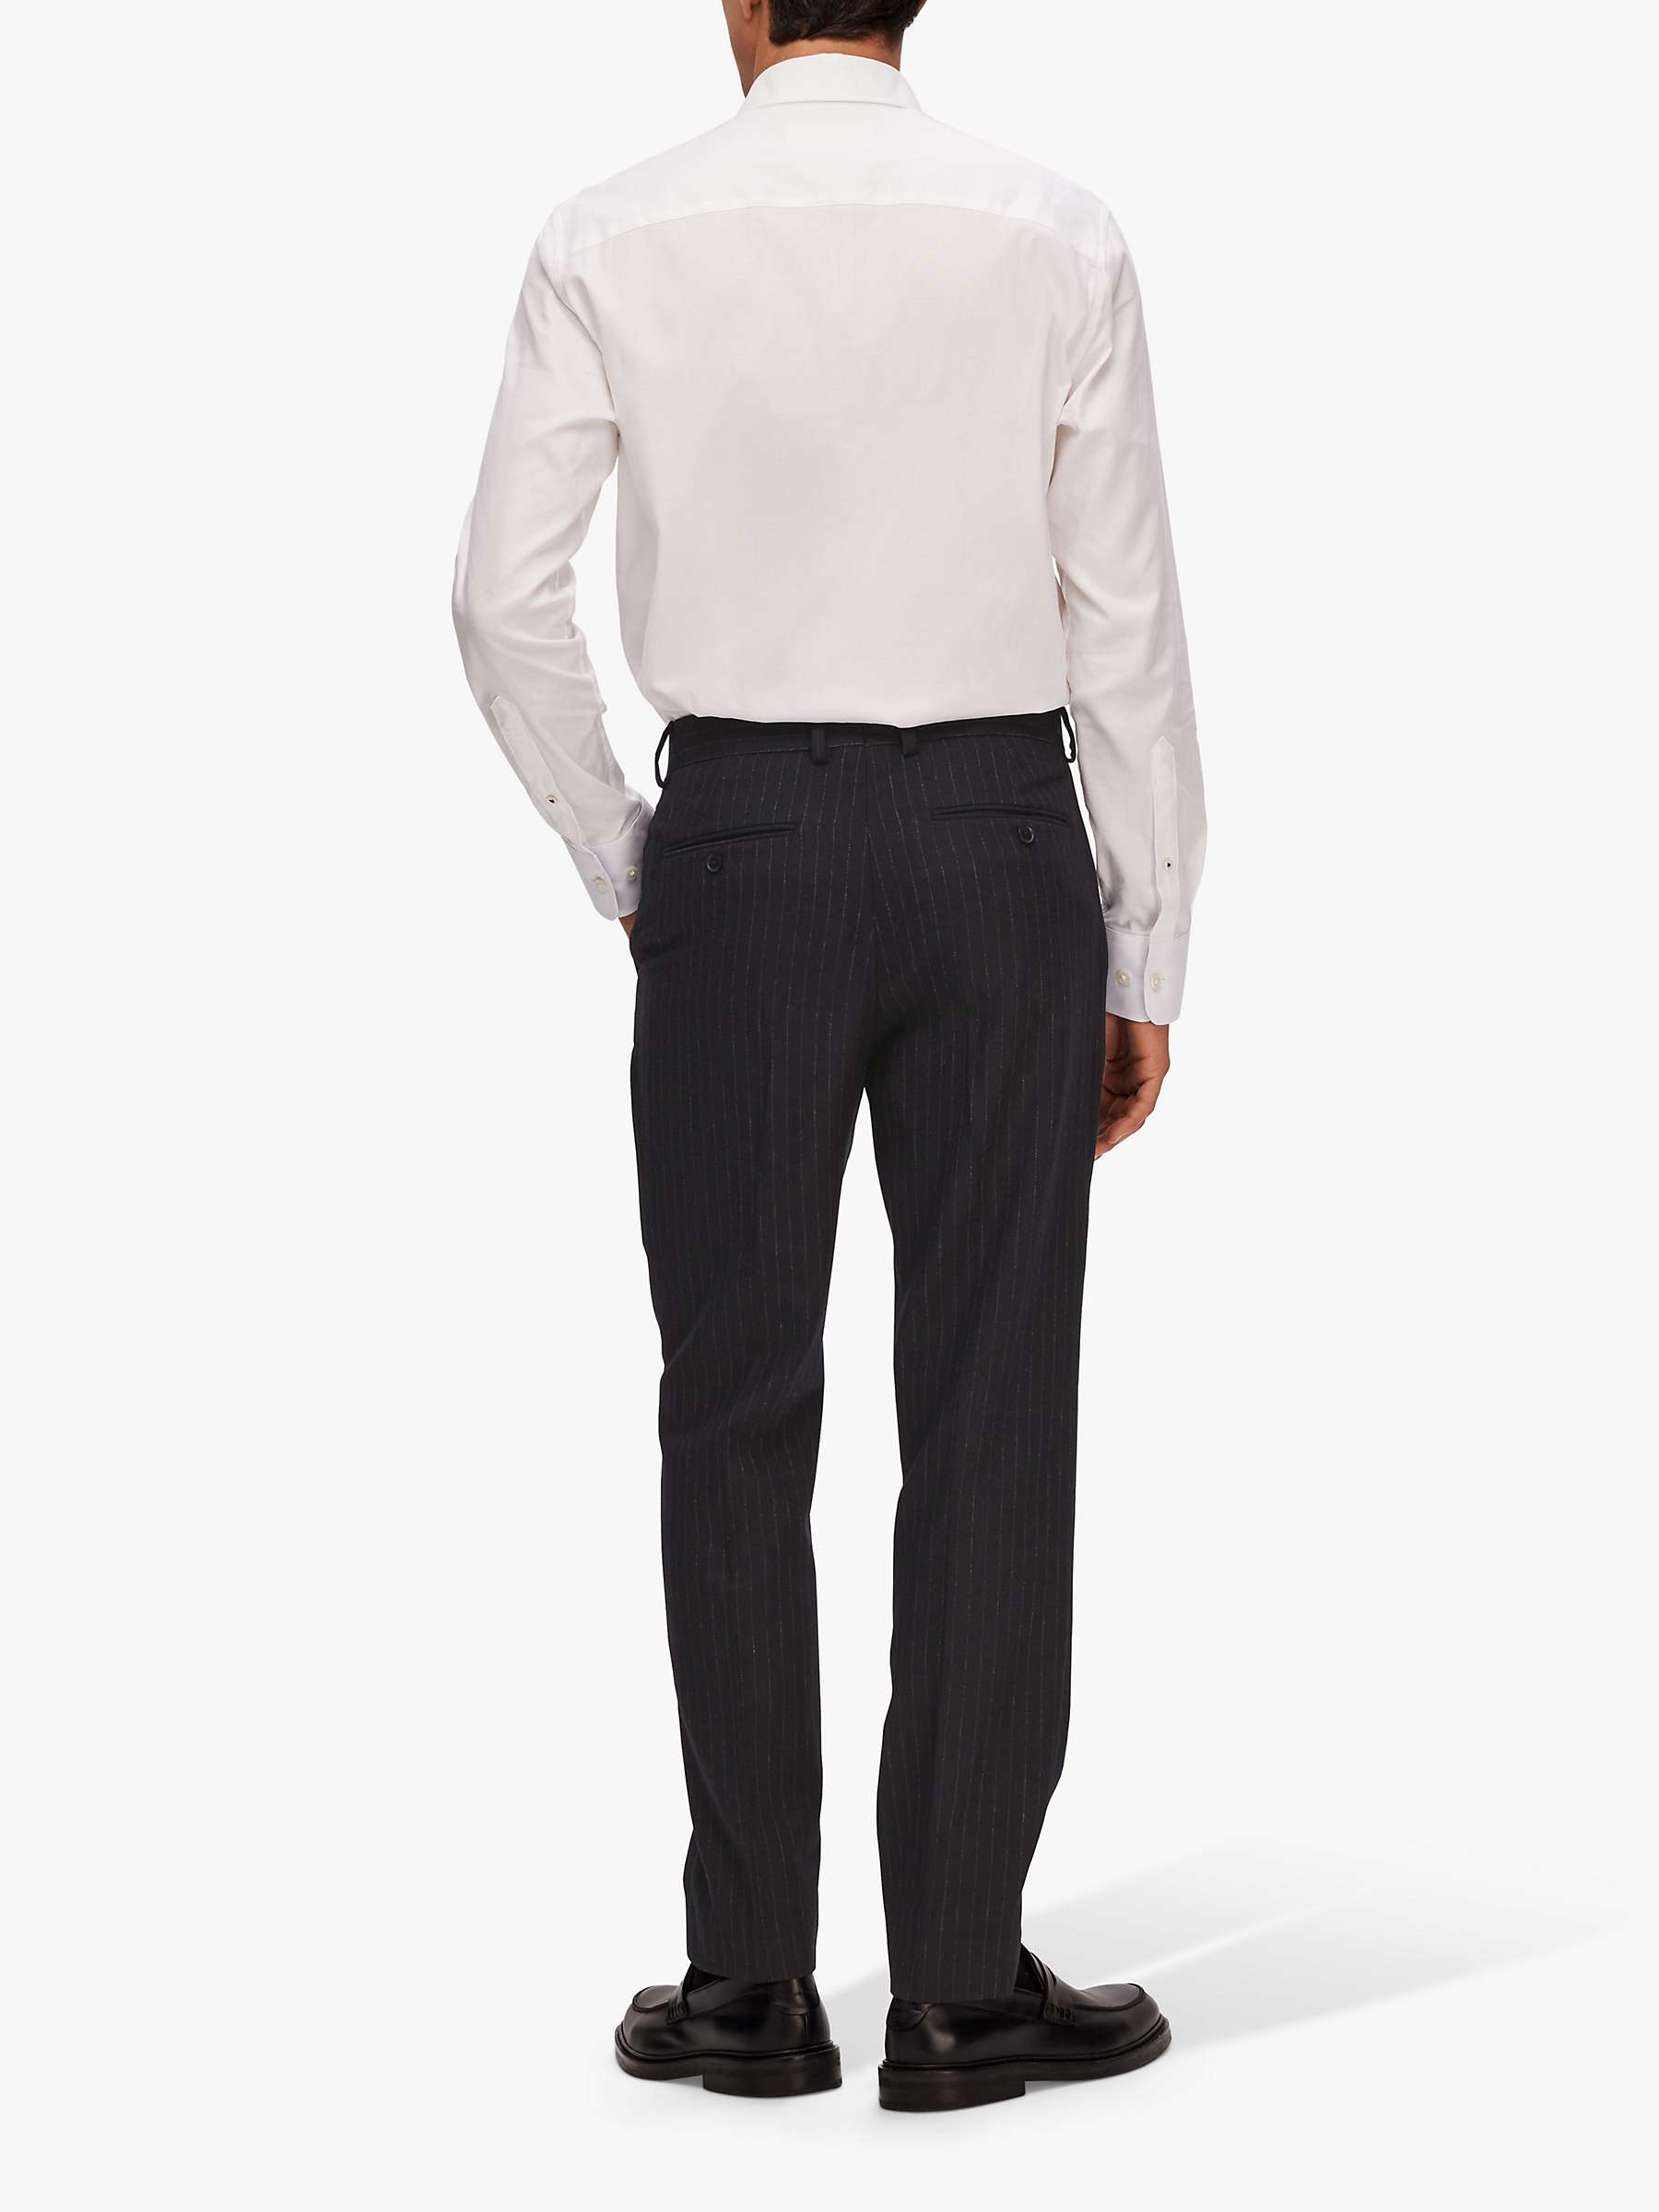 Buy SELECTED HOMME Slim Fit Striped Trousers, Navy Online at johnlewis.com